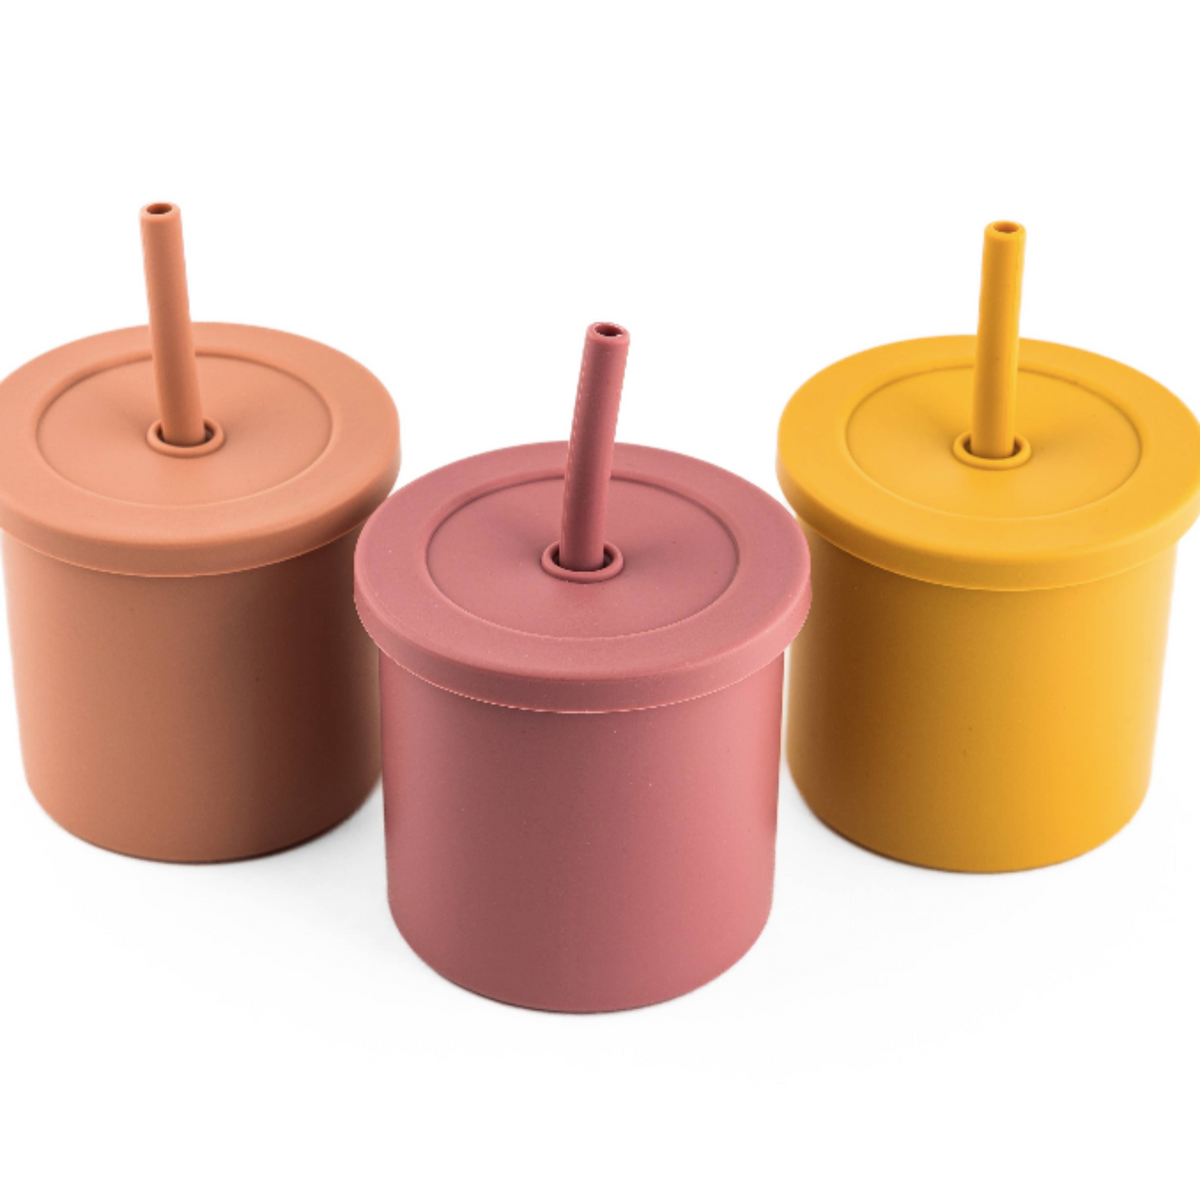 2 in 1 Straw Cup and Snack Container - Warm Tones: Ginger